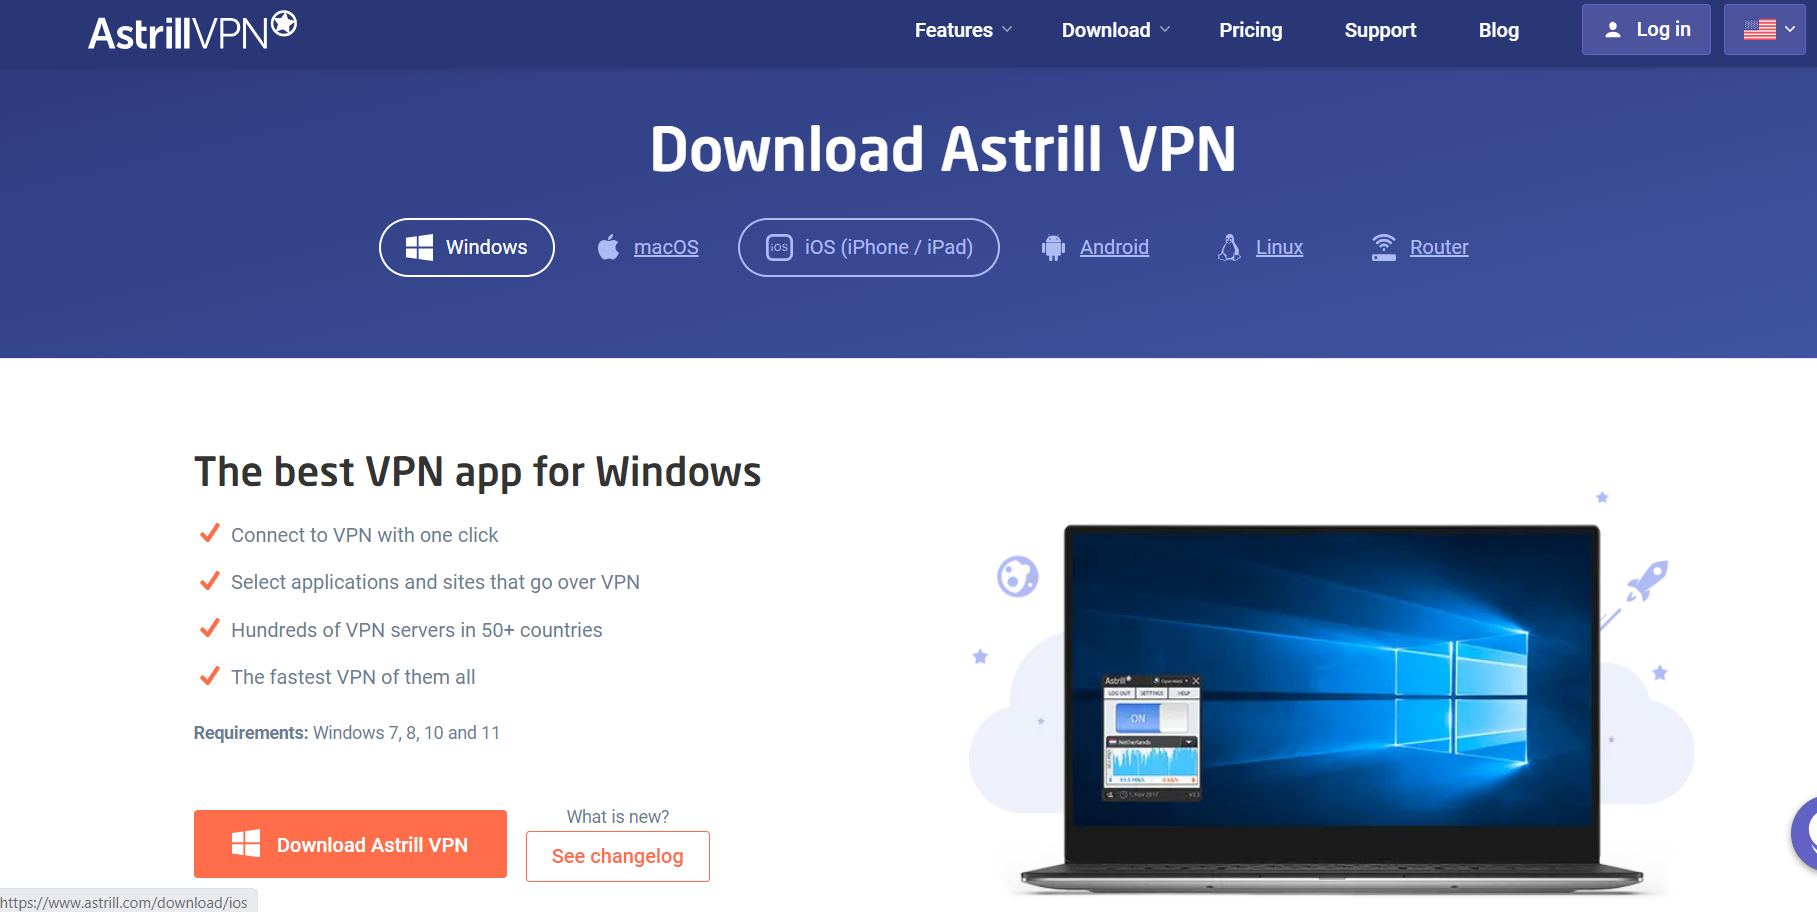 Download and Install the AstrillVPN app f